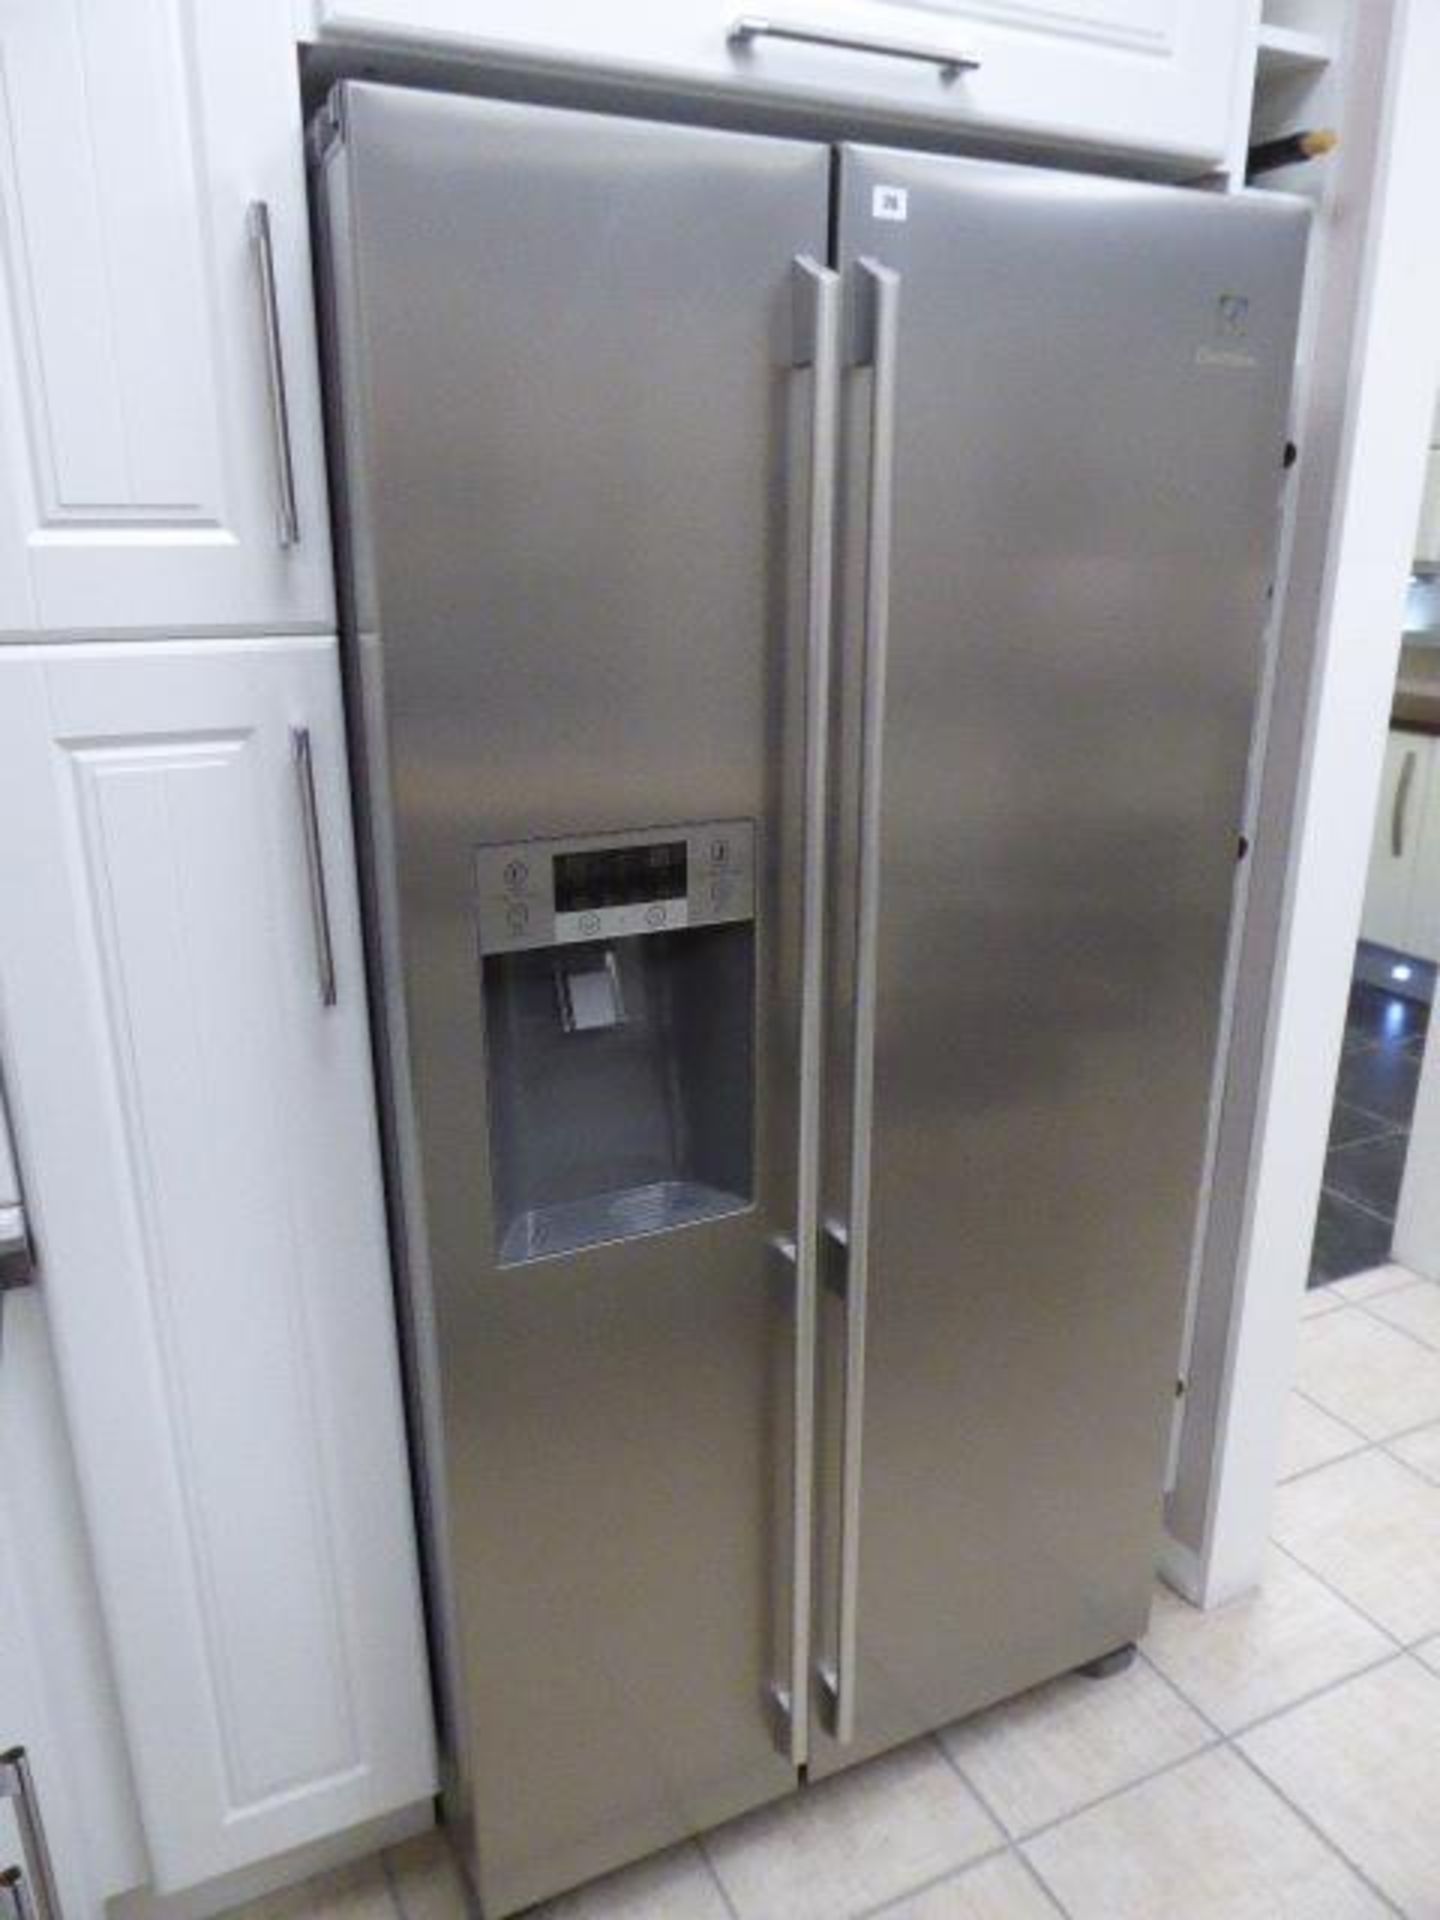 Electrolux ELA614WOX free standing American style fridge freezer (Located at the Lincoln saleroom)